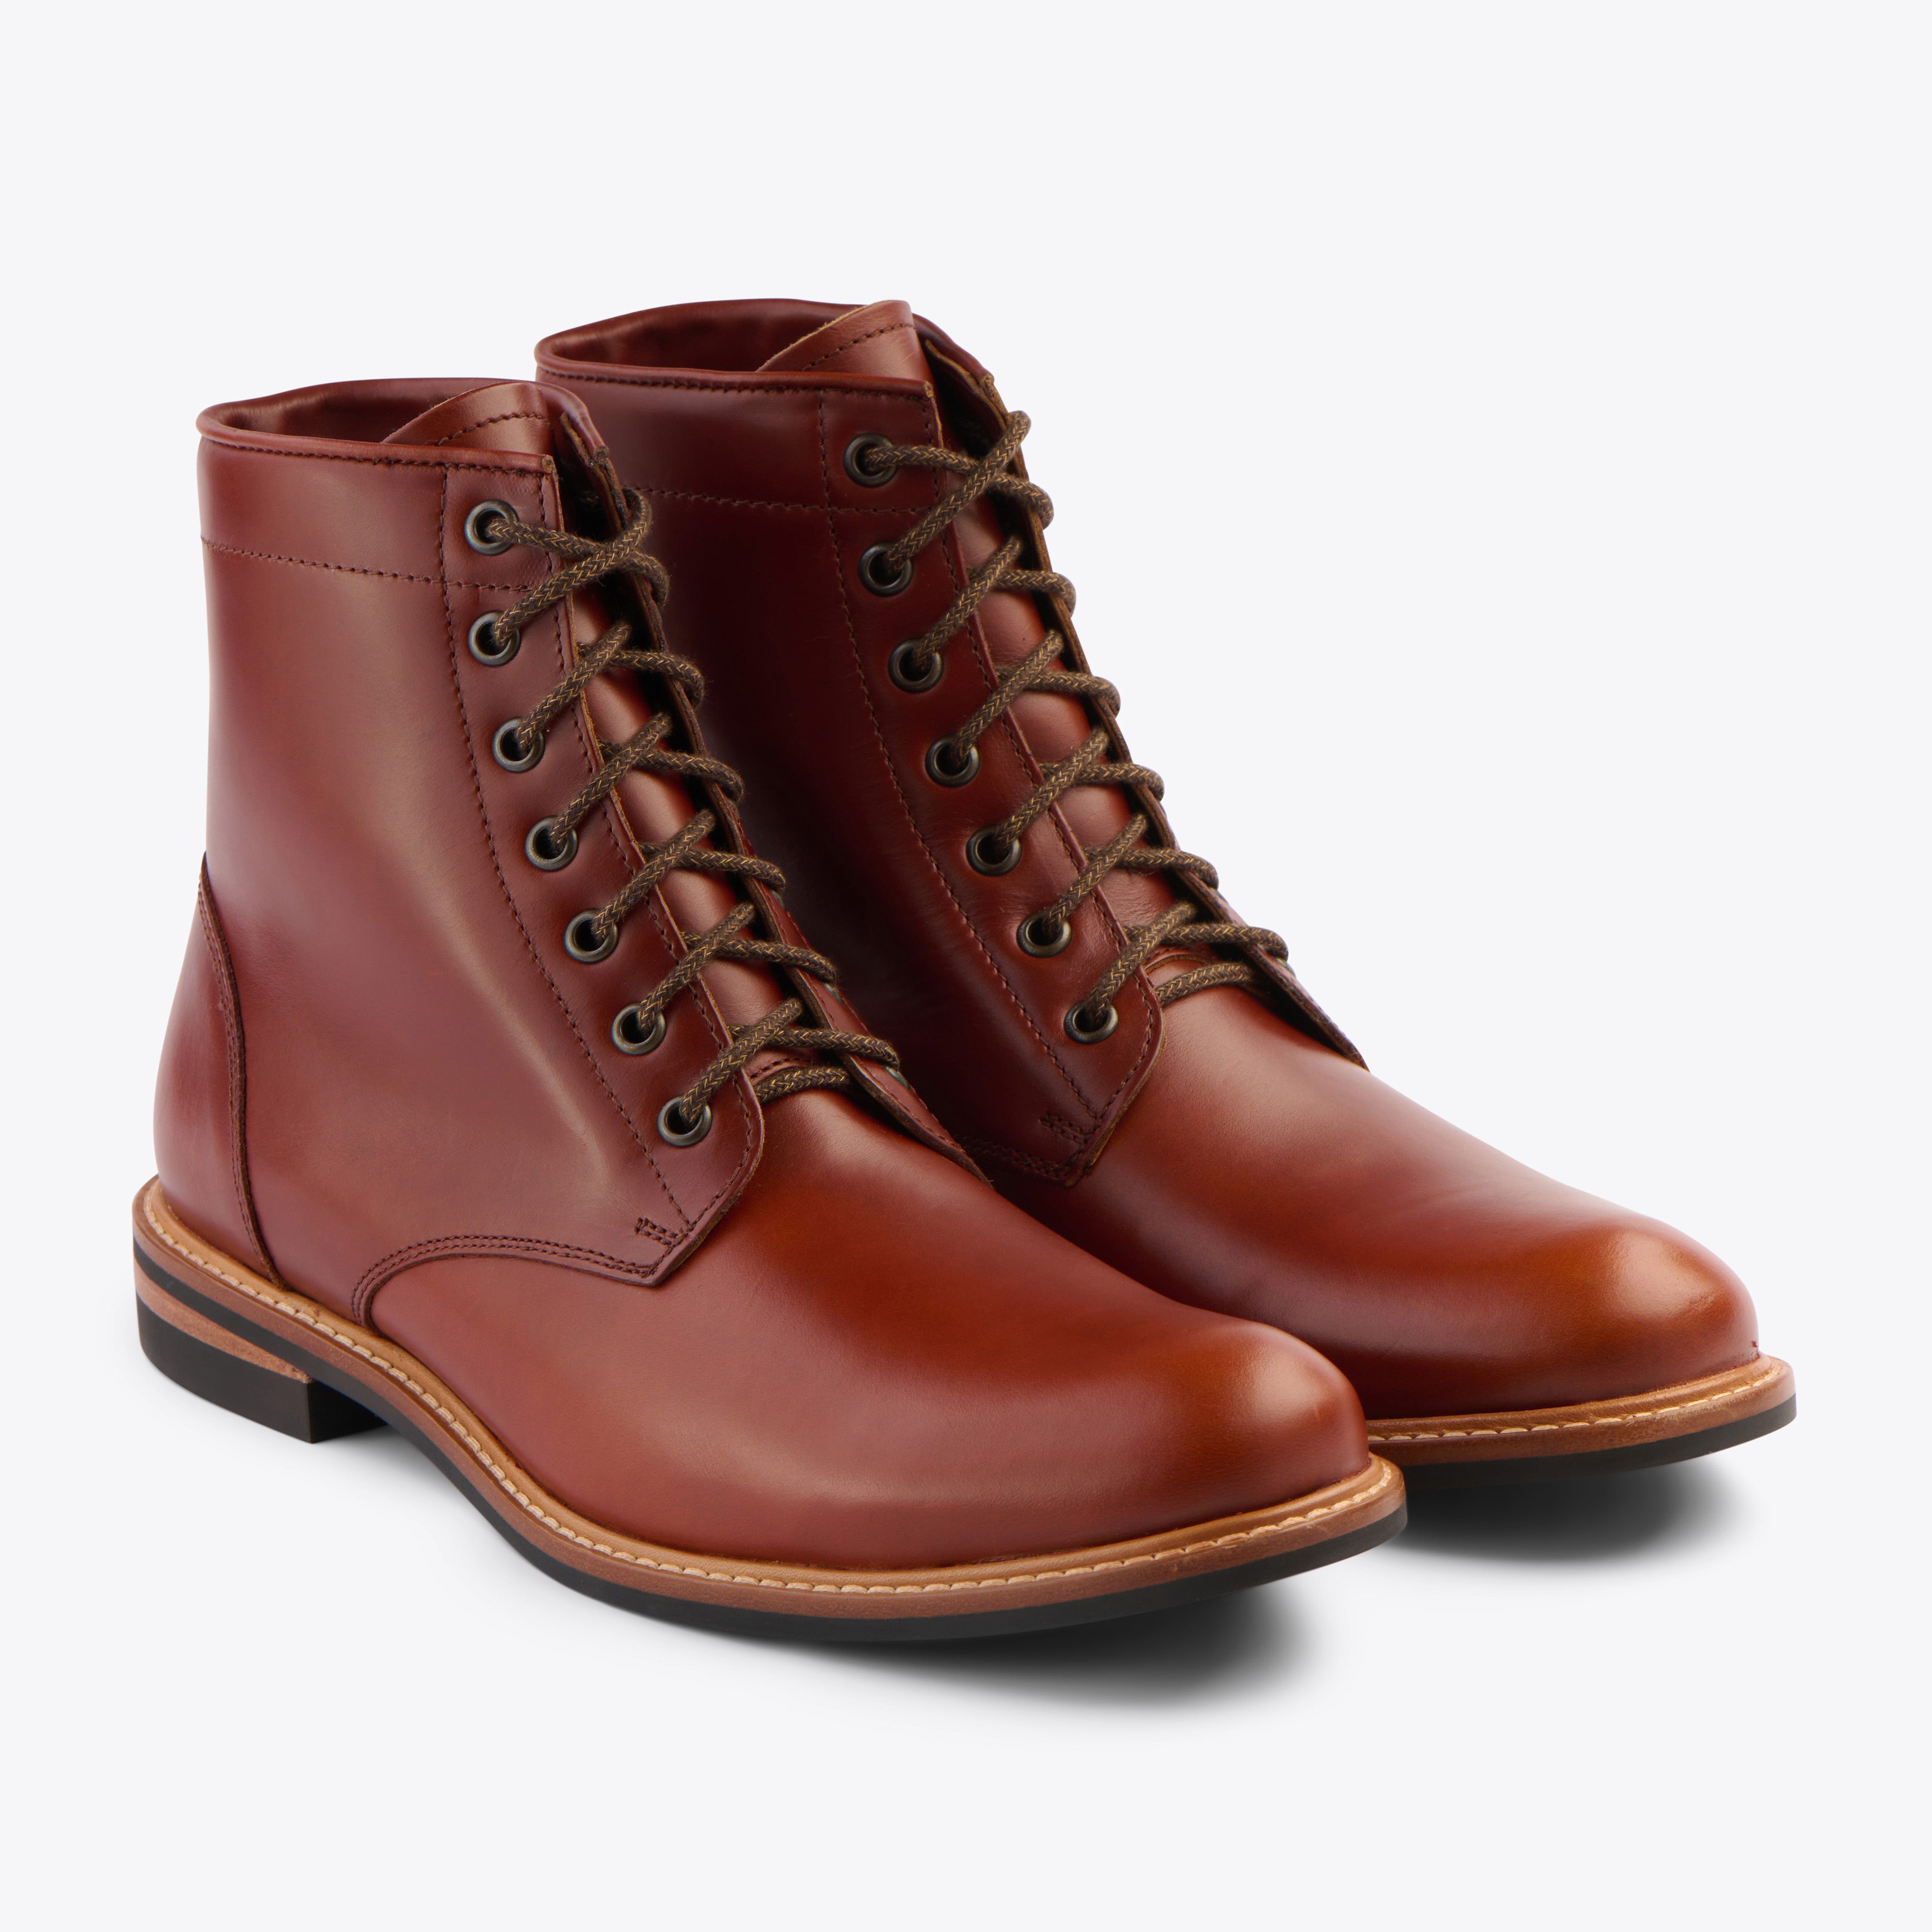 All-Weather Andres Boot Brandy